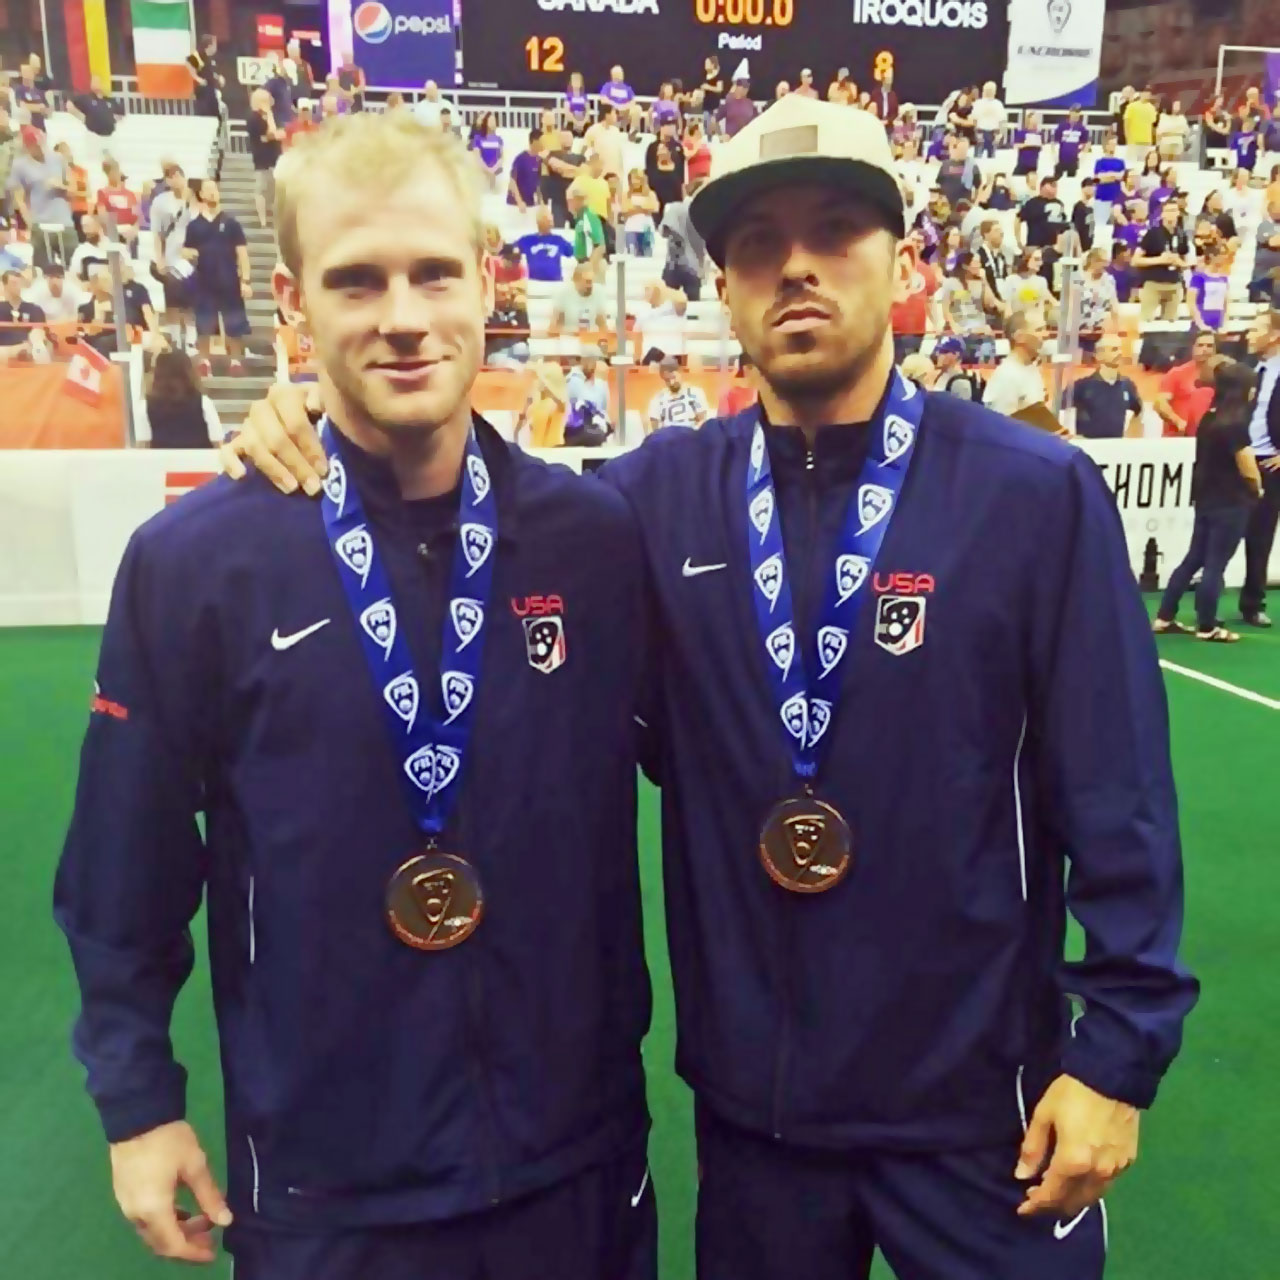 Joe Walters poses with Knighthawks teammate after winning bronze medal